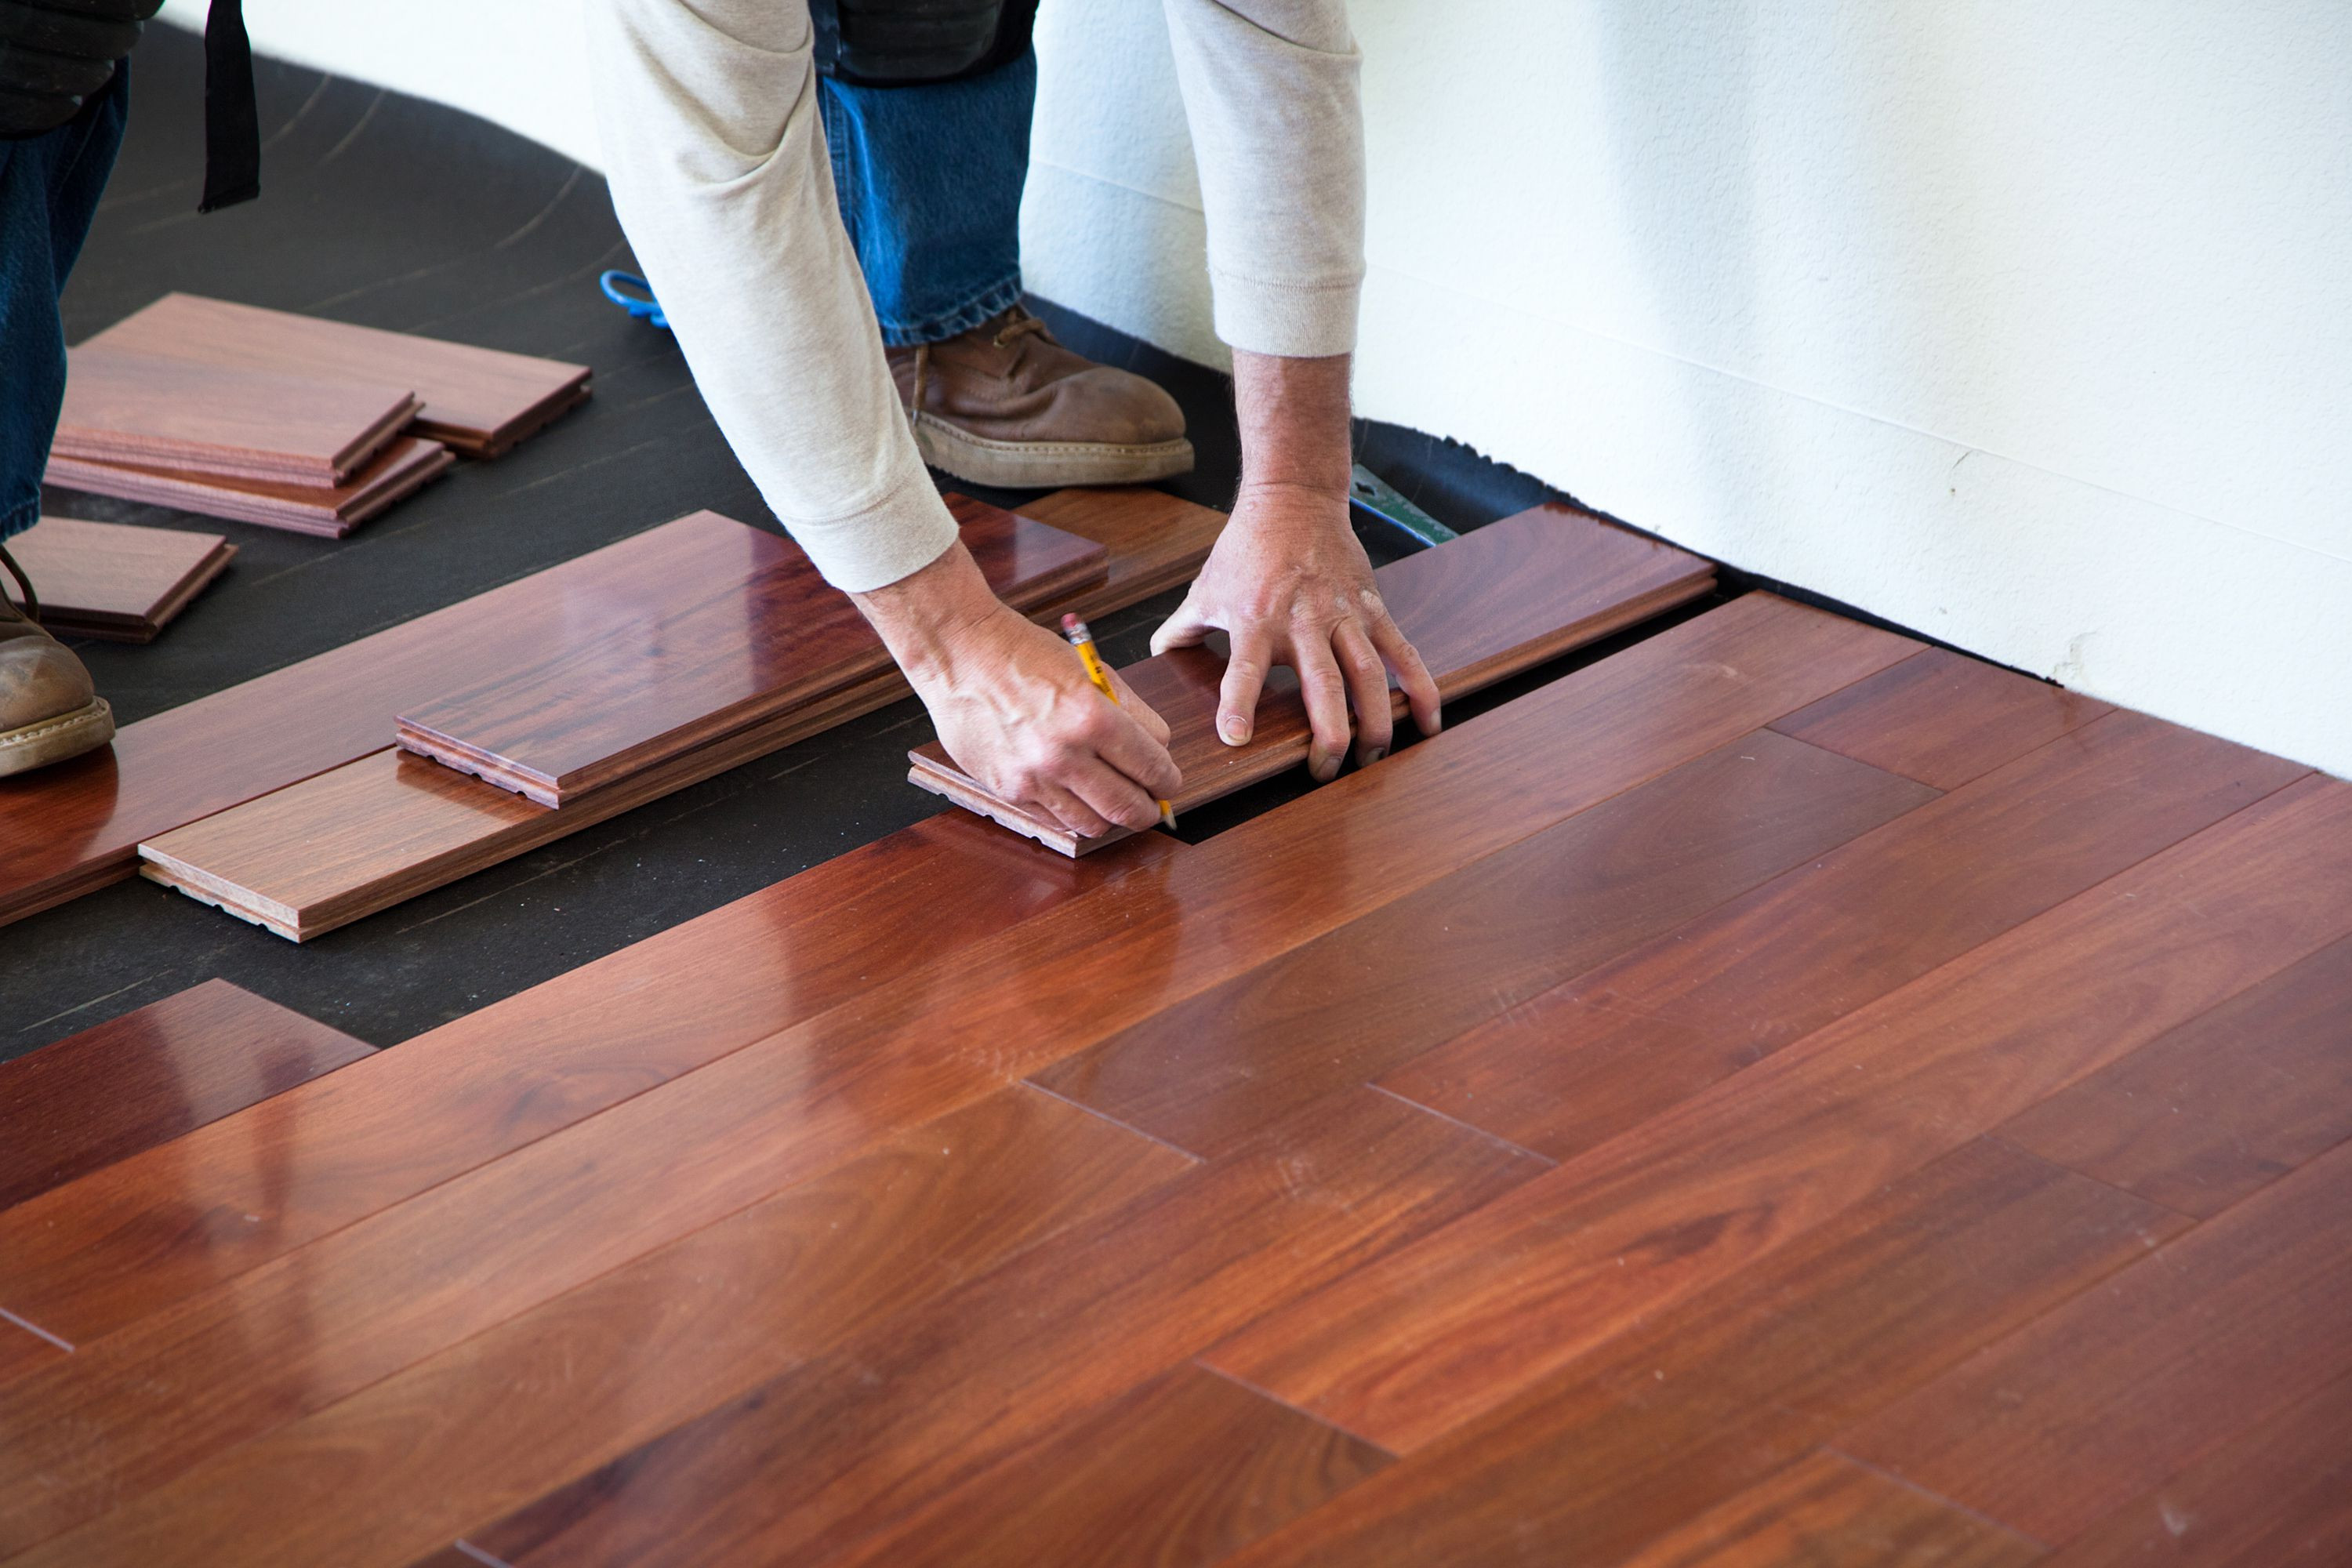 15 Stunning How Do You Install Hardwood Floors On A Concrete Slab 2024 free download how do you install hardwood floors on a concrete slab of the subfloor is the foundation of a good floor pertaining to installing hardwood floor 170040982 582b748c5f9b58d5b17d0c58